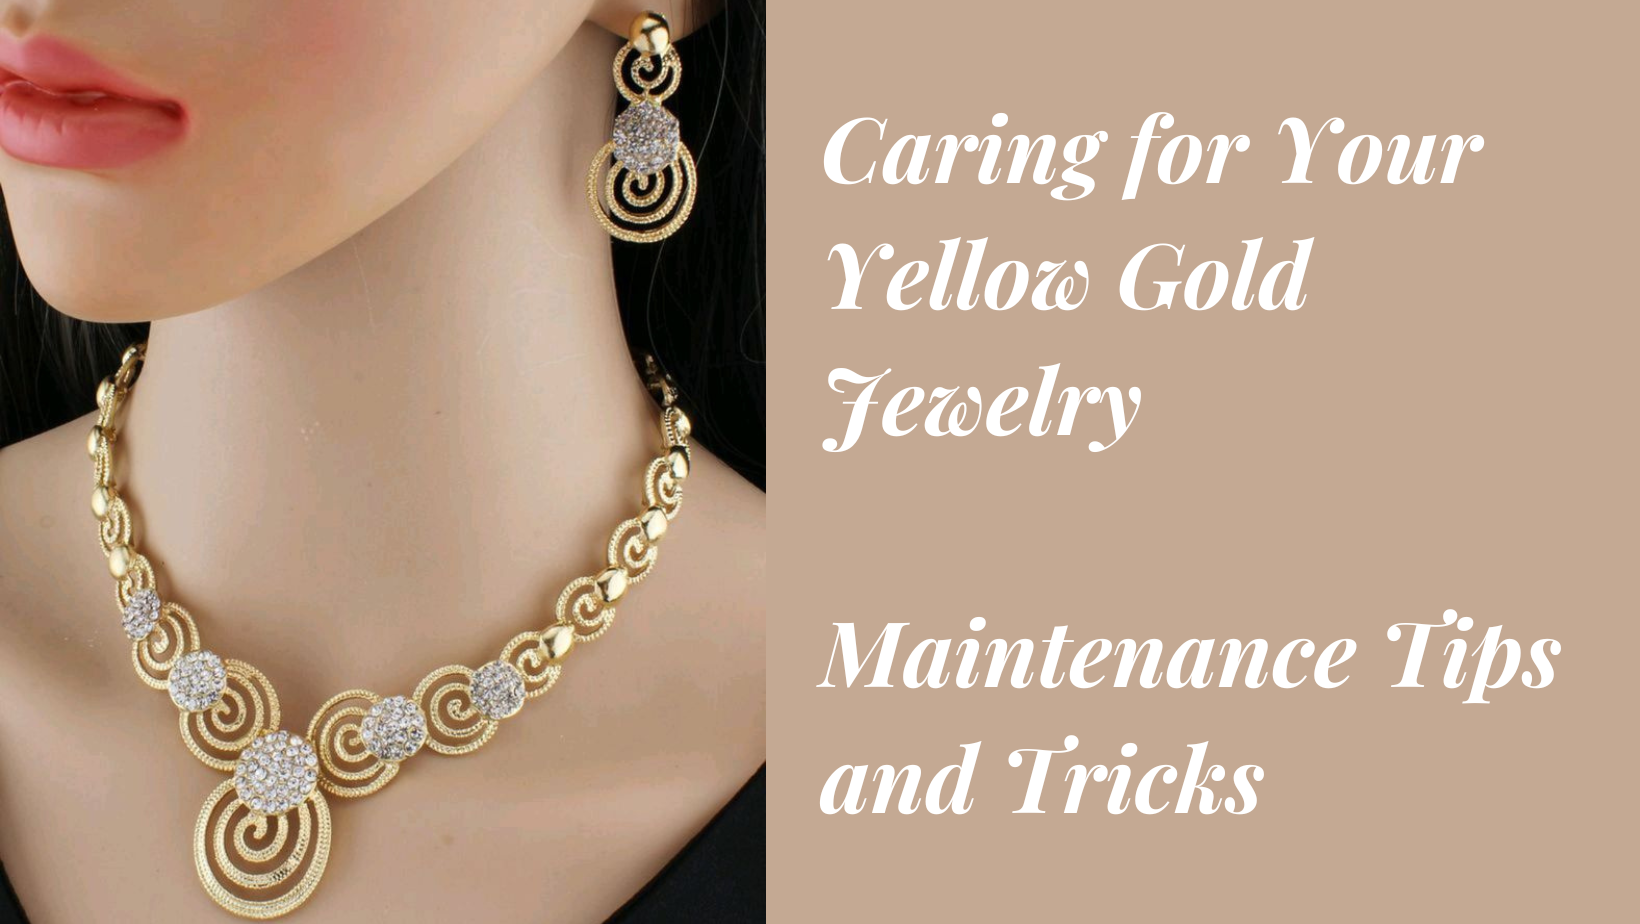 Caring for Your Yellow Gold Jewelry: Maintenance Tips and Tricks